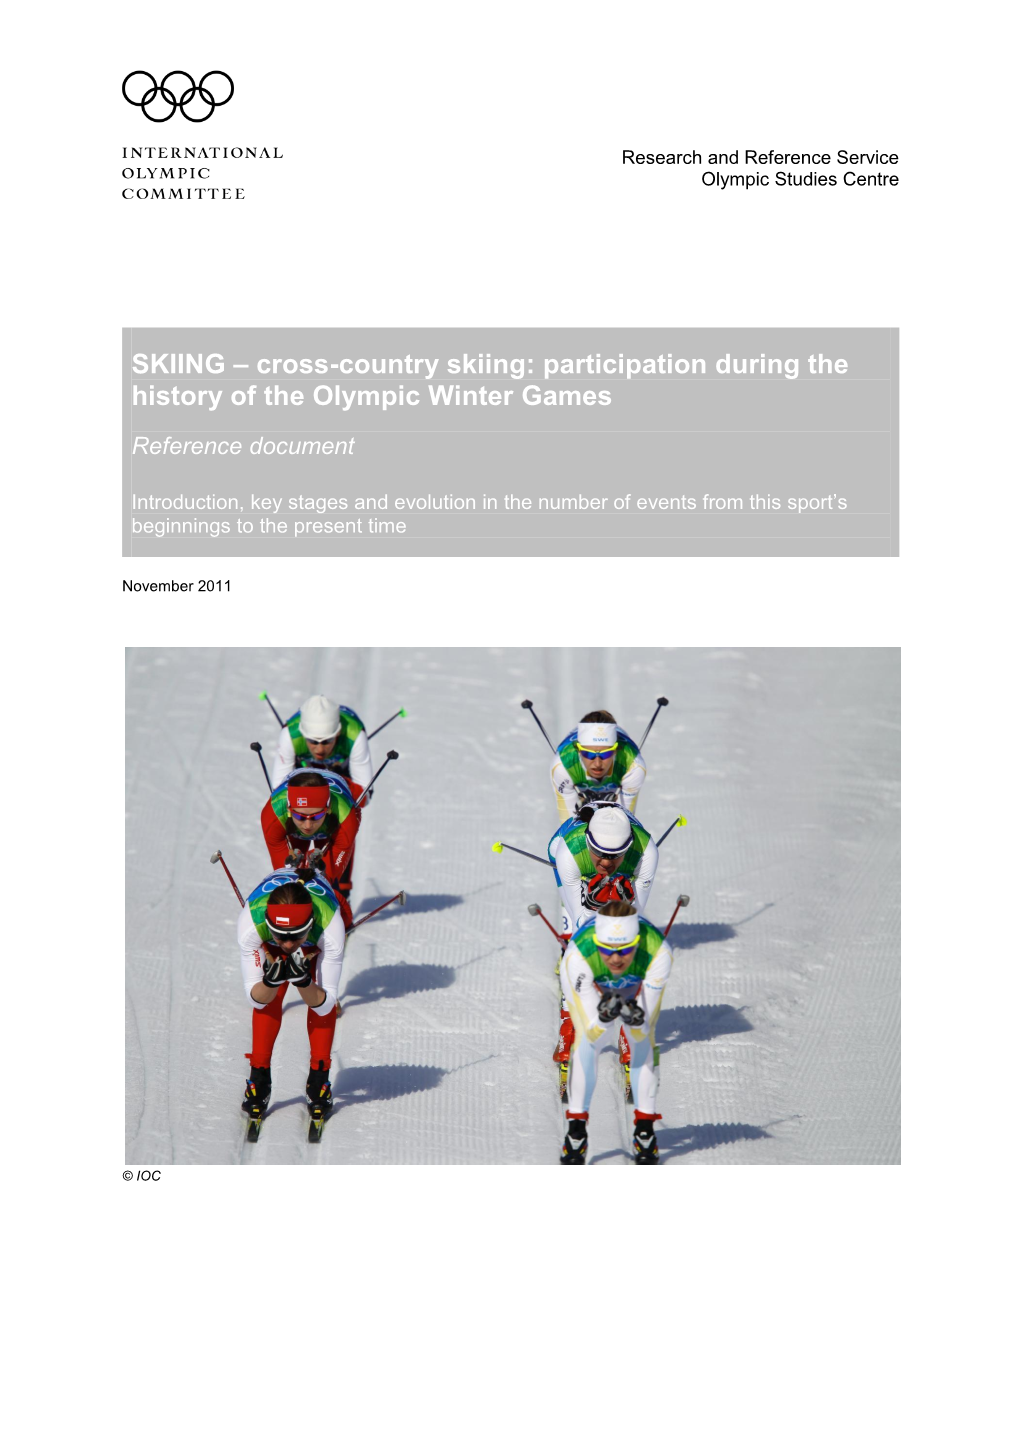 SKIING – Cross-Country Skiing: Participation During the History of the Olympic Winter Games